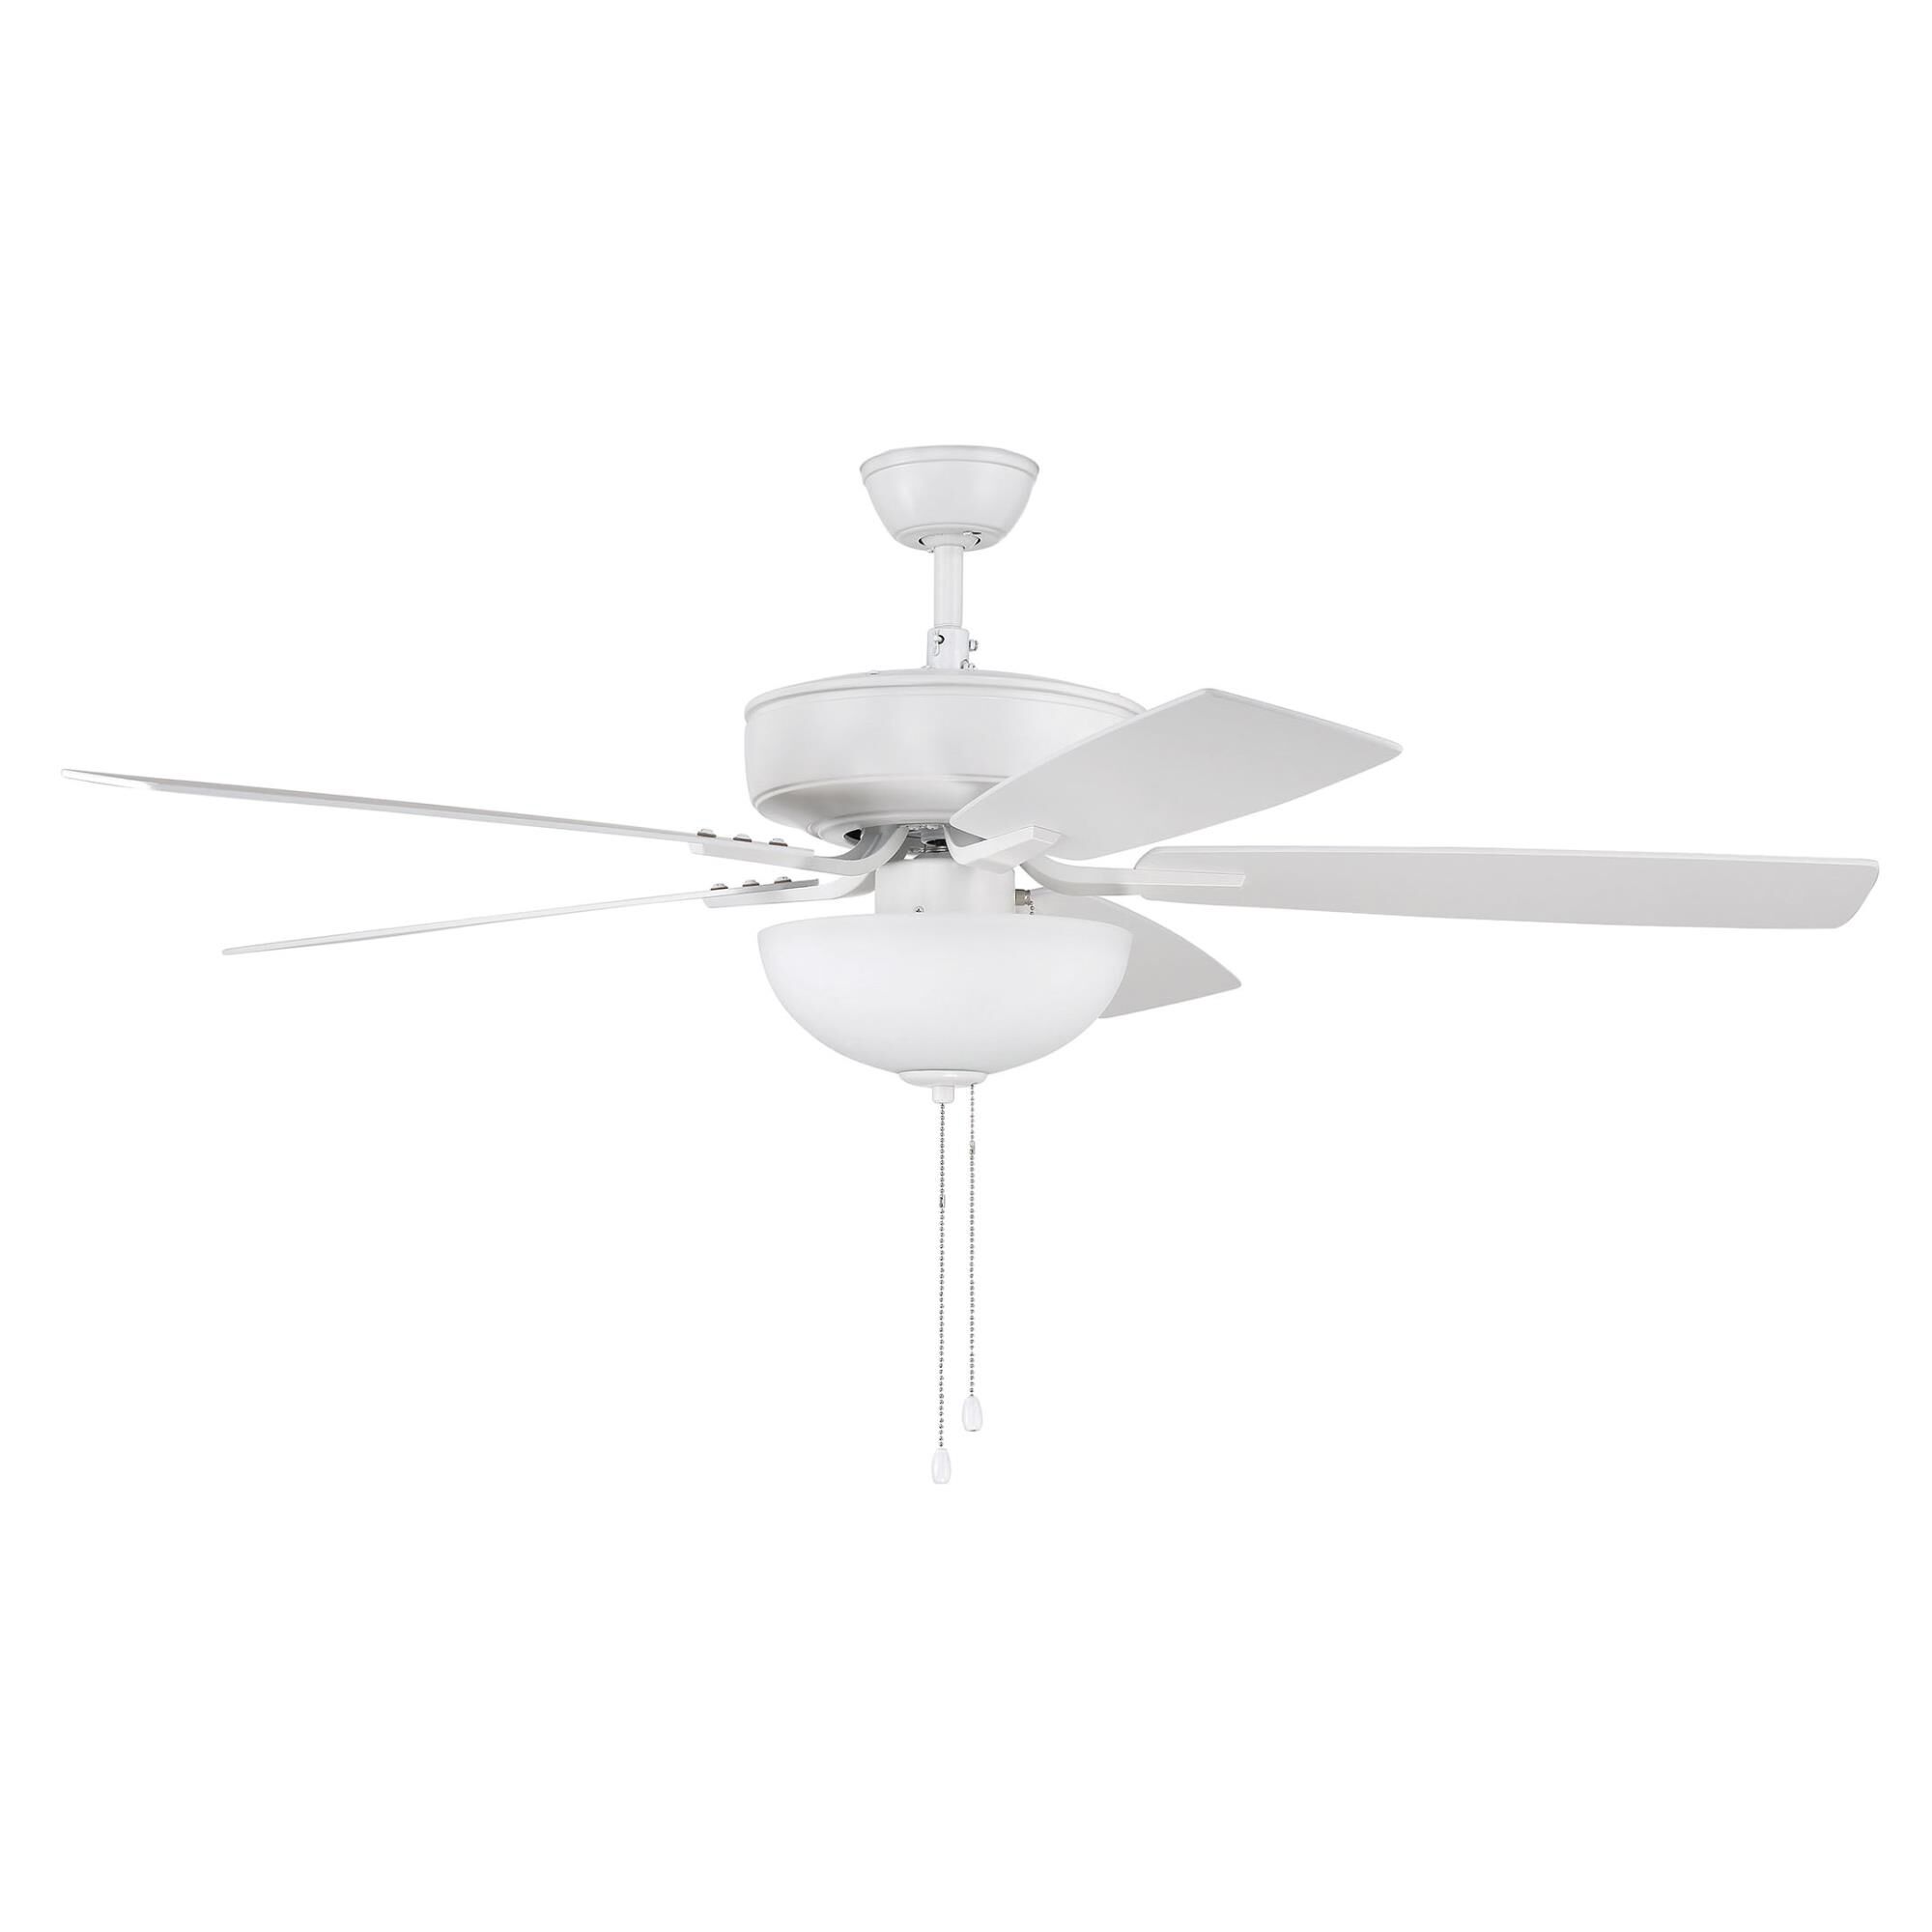 Photos - Fan Craftmade Pro Plus 52 Inch Ceiling  with Light Kit Pro Plus - P211W5-52